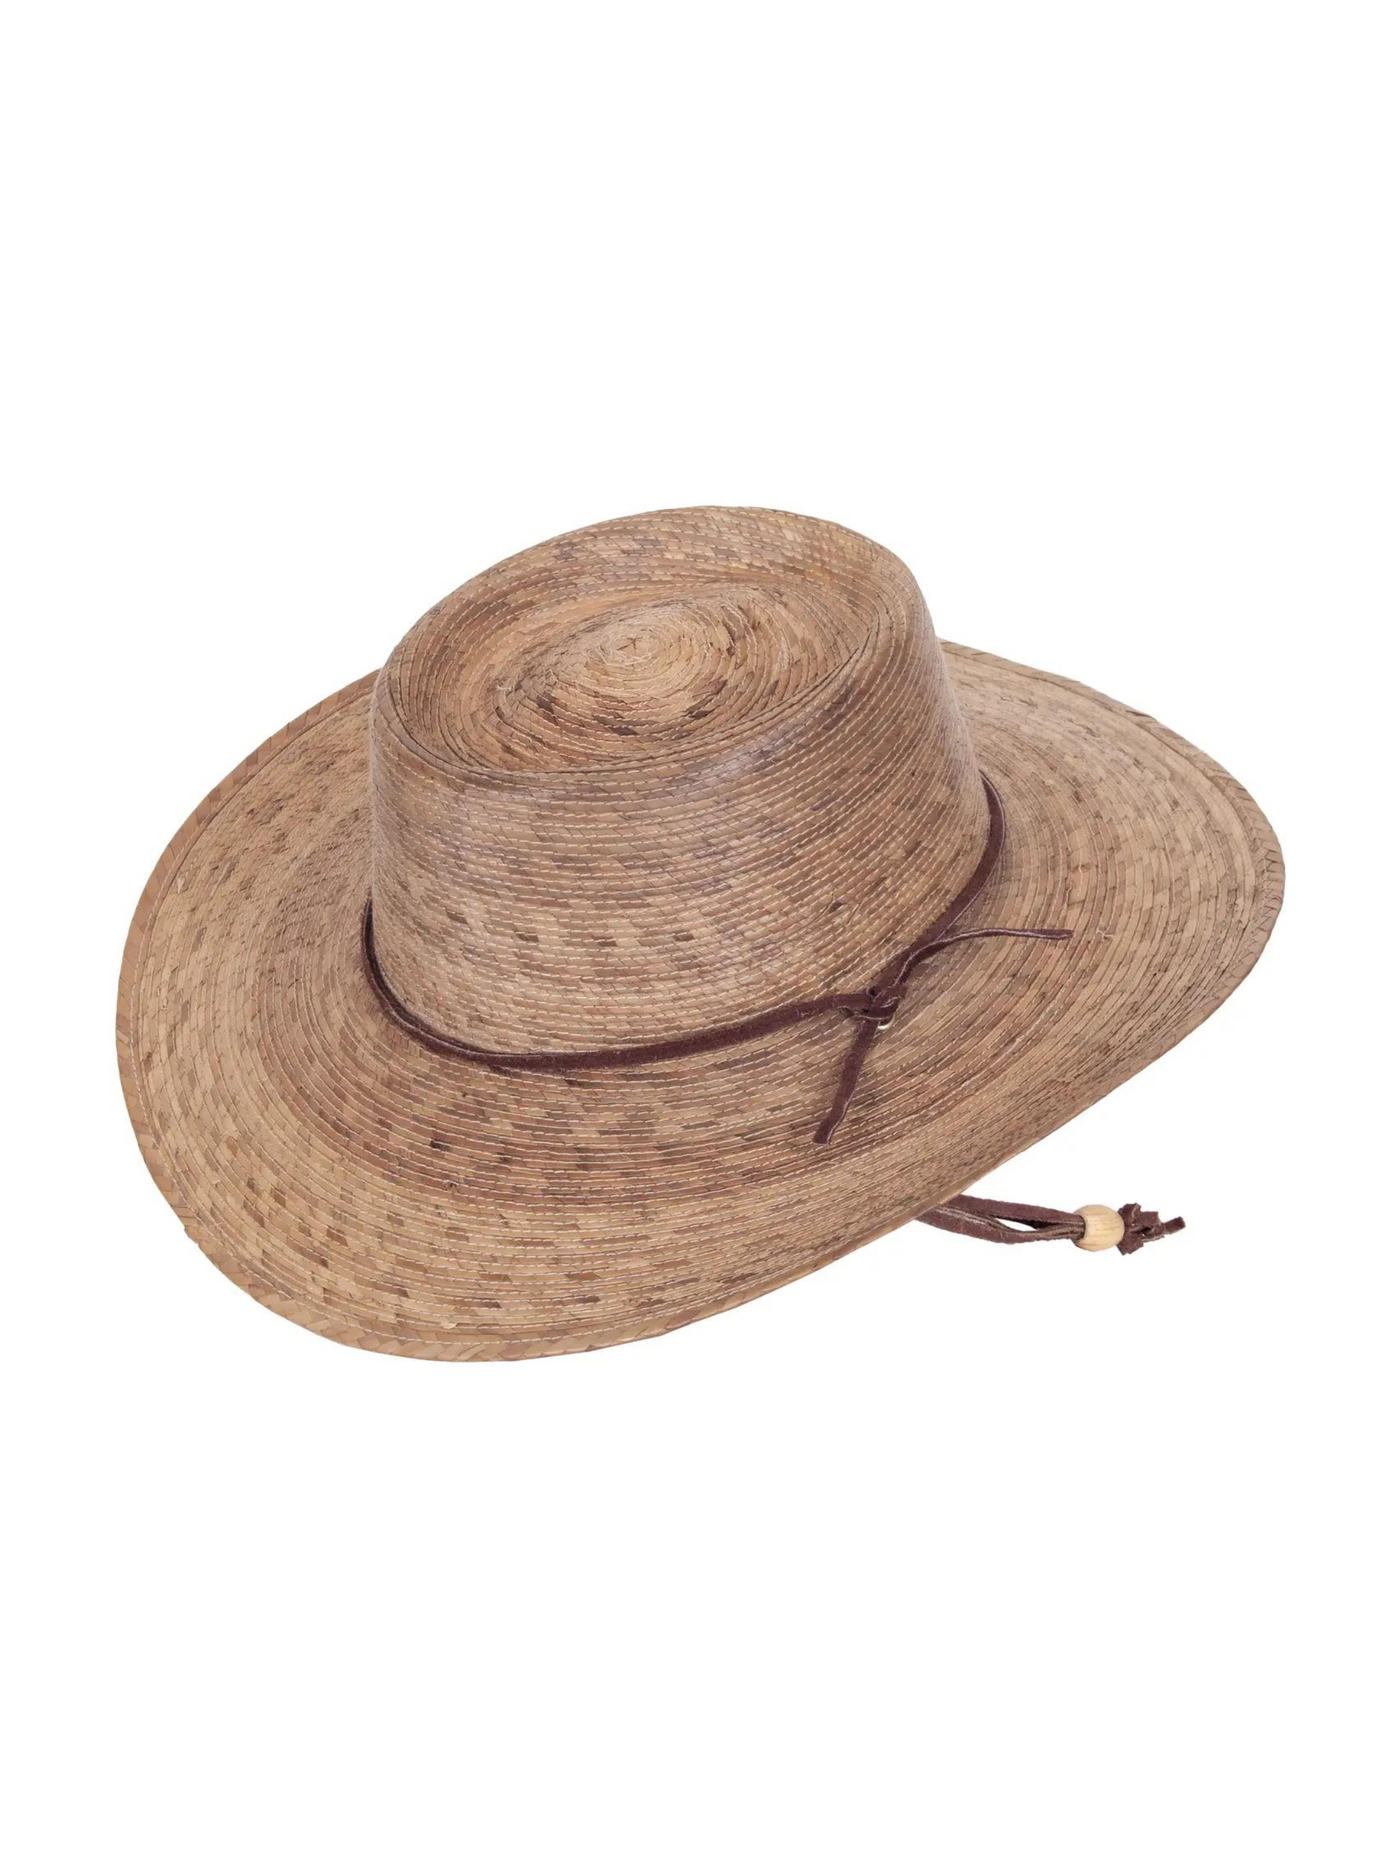 Outback Handwoven Palm Hat